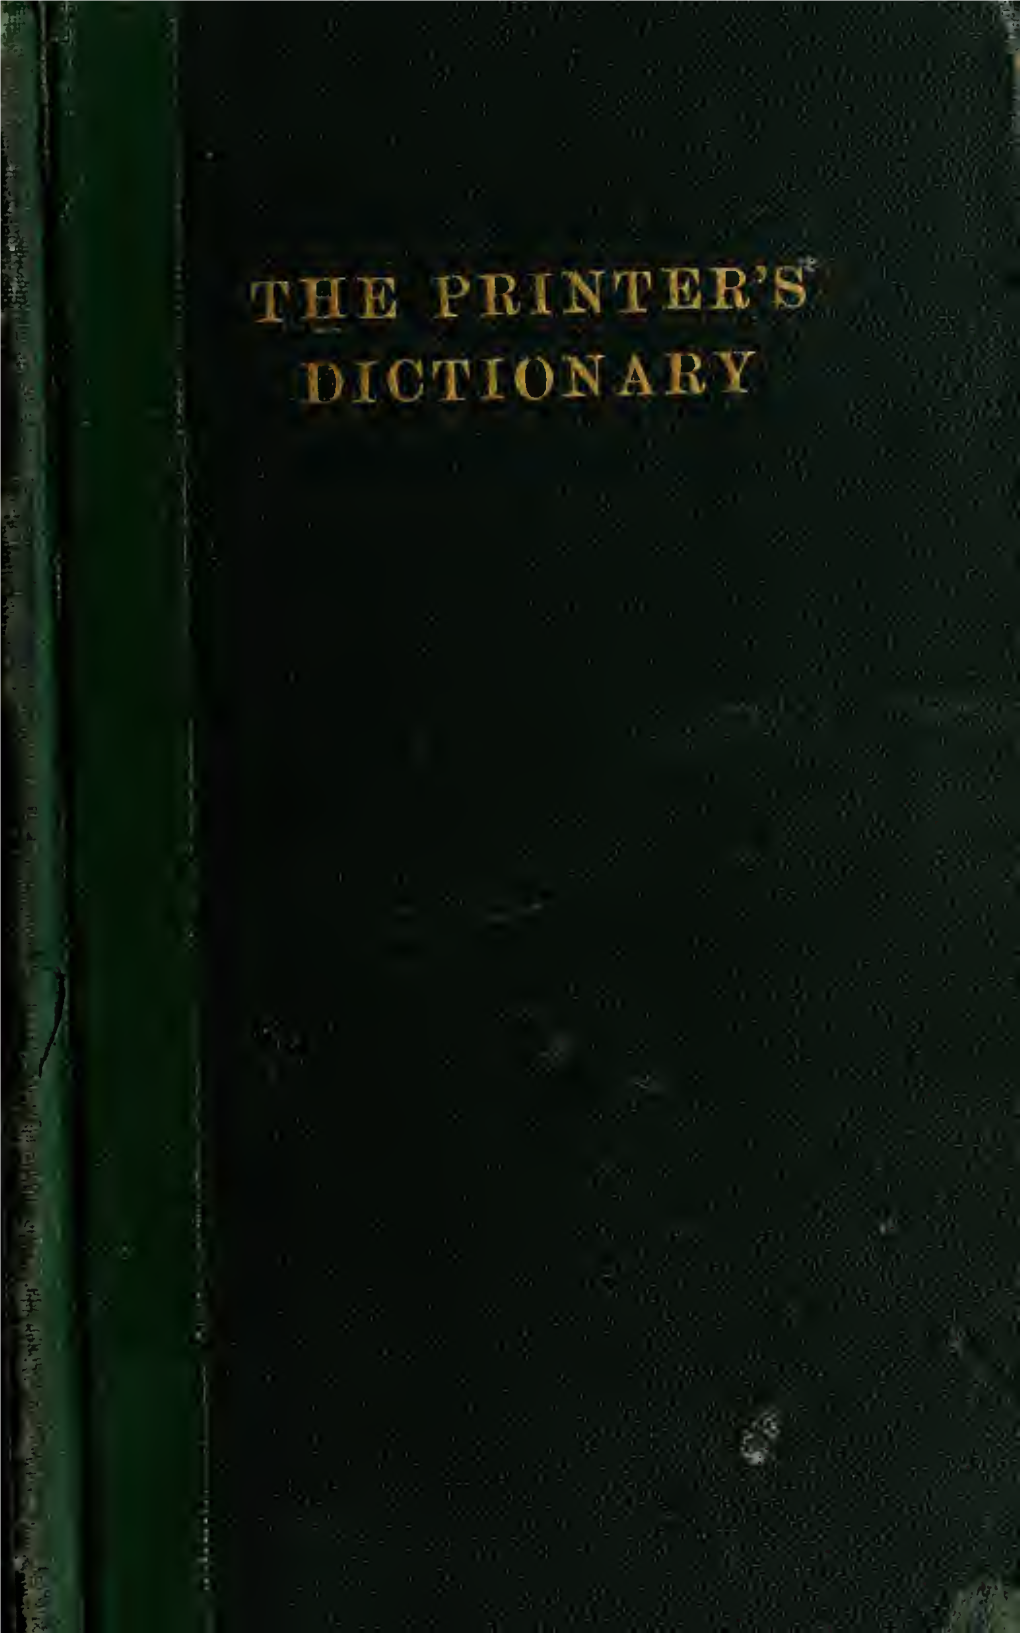 The Printer's Dictionary of Technical Terms; a Handbook of Definitions